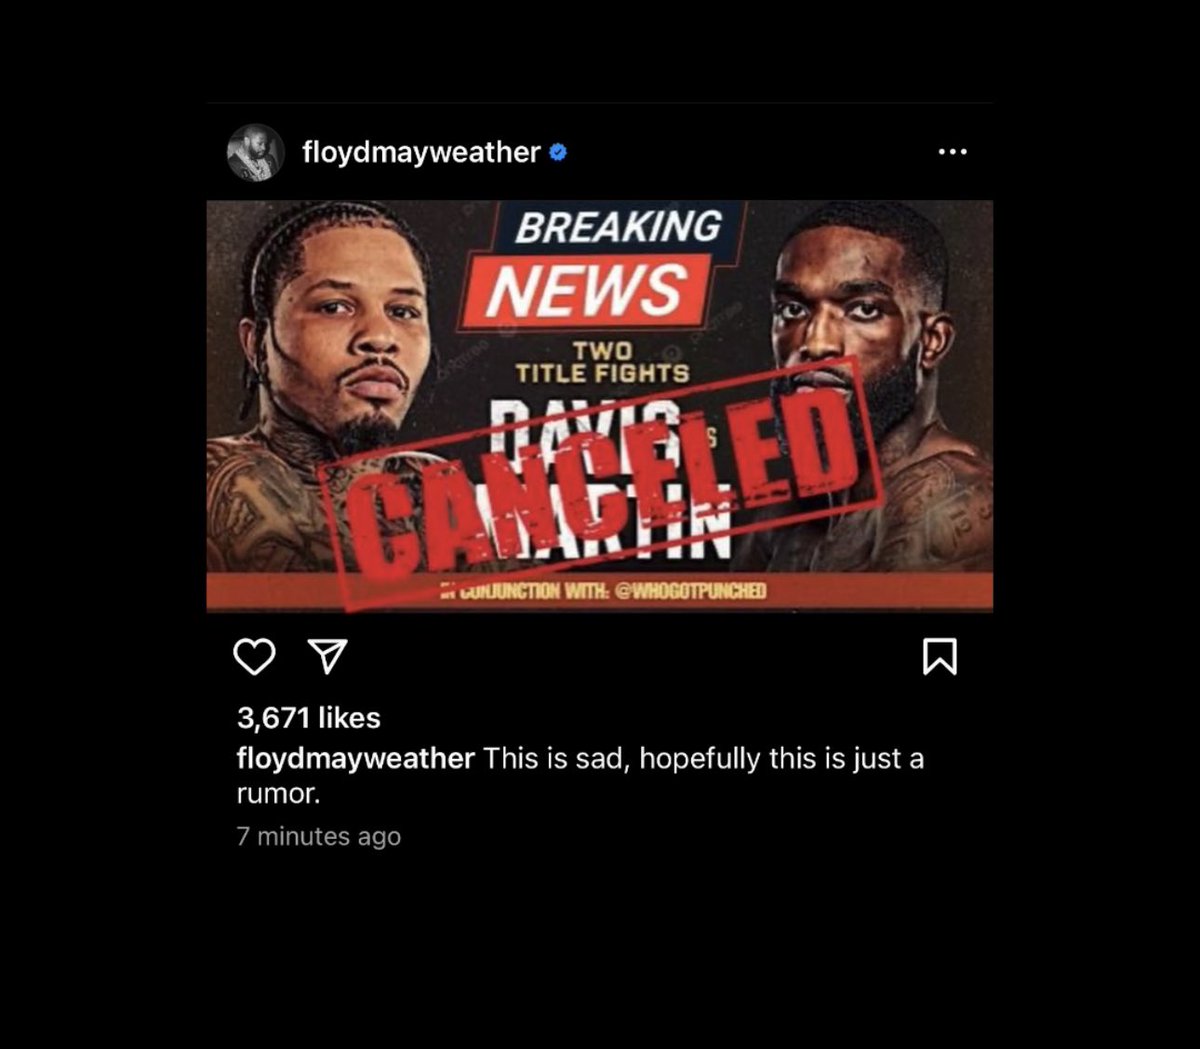 Floyd Mayweather is a master at trolling 🤣🤣 #Boxing 🤦‍♂️🤦‍♂️🥊🥊🥊